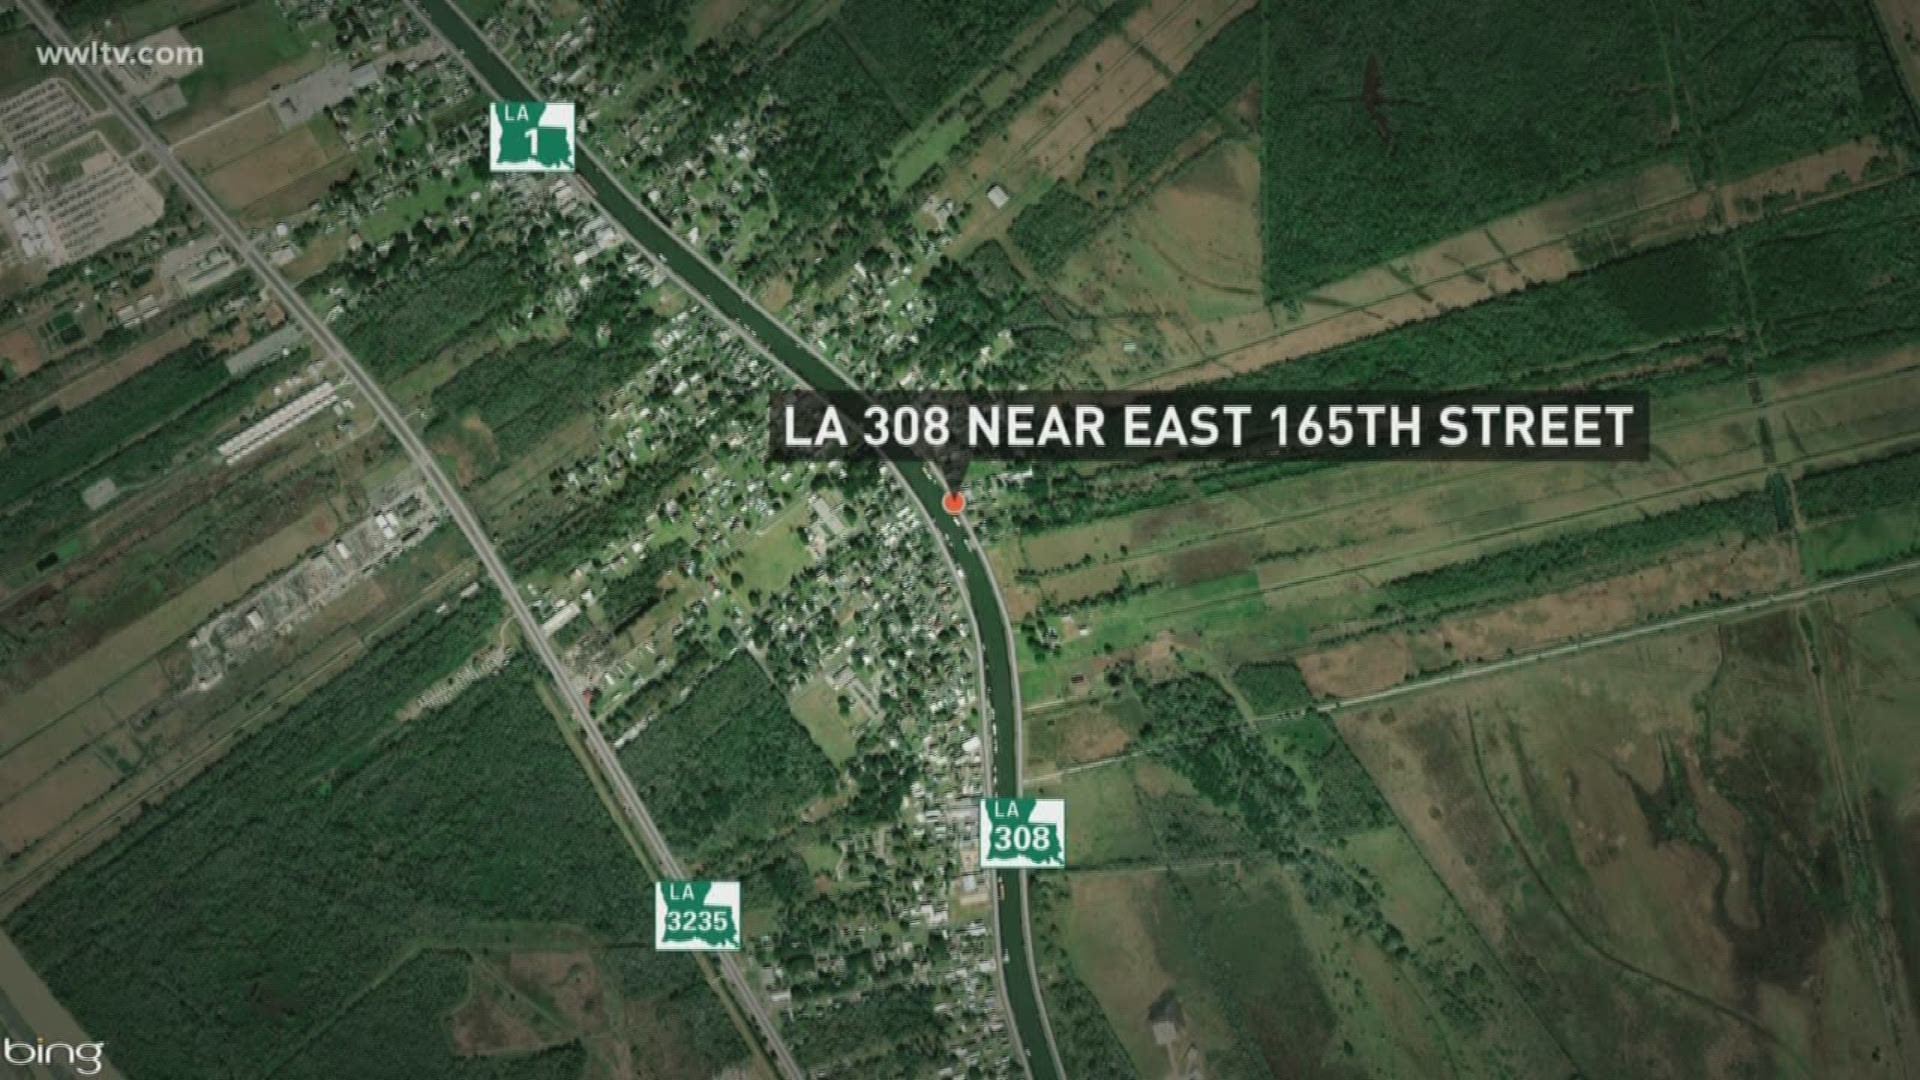 According to Louisiana State Police, the crash happened shortly before midnight on LA 308 near East 165th Street.